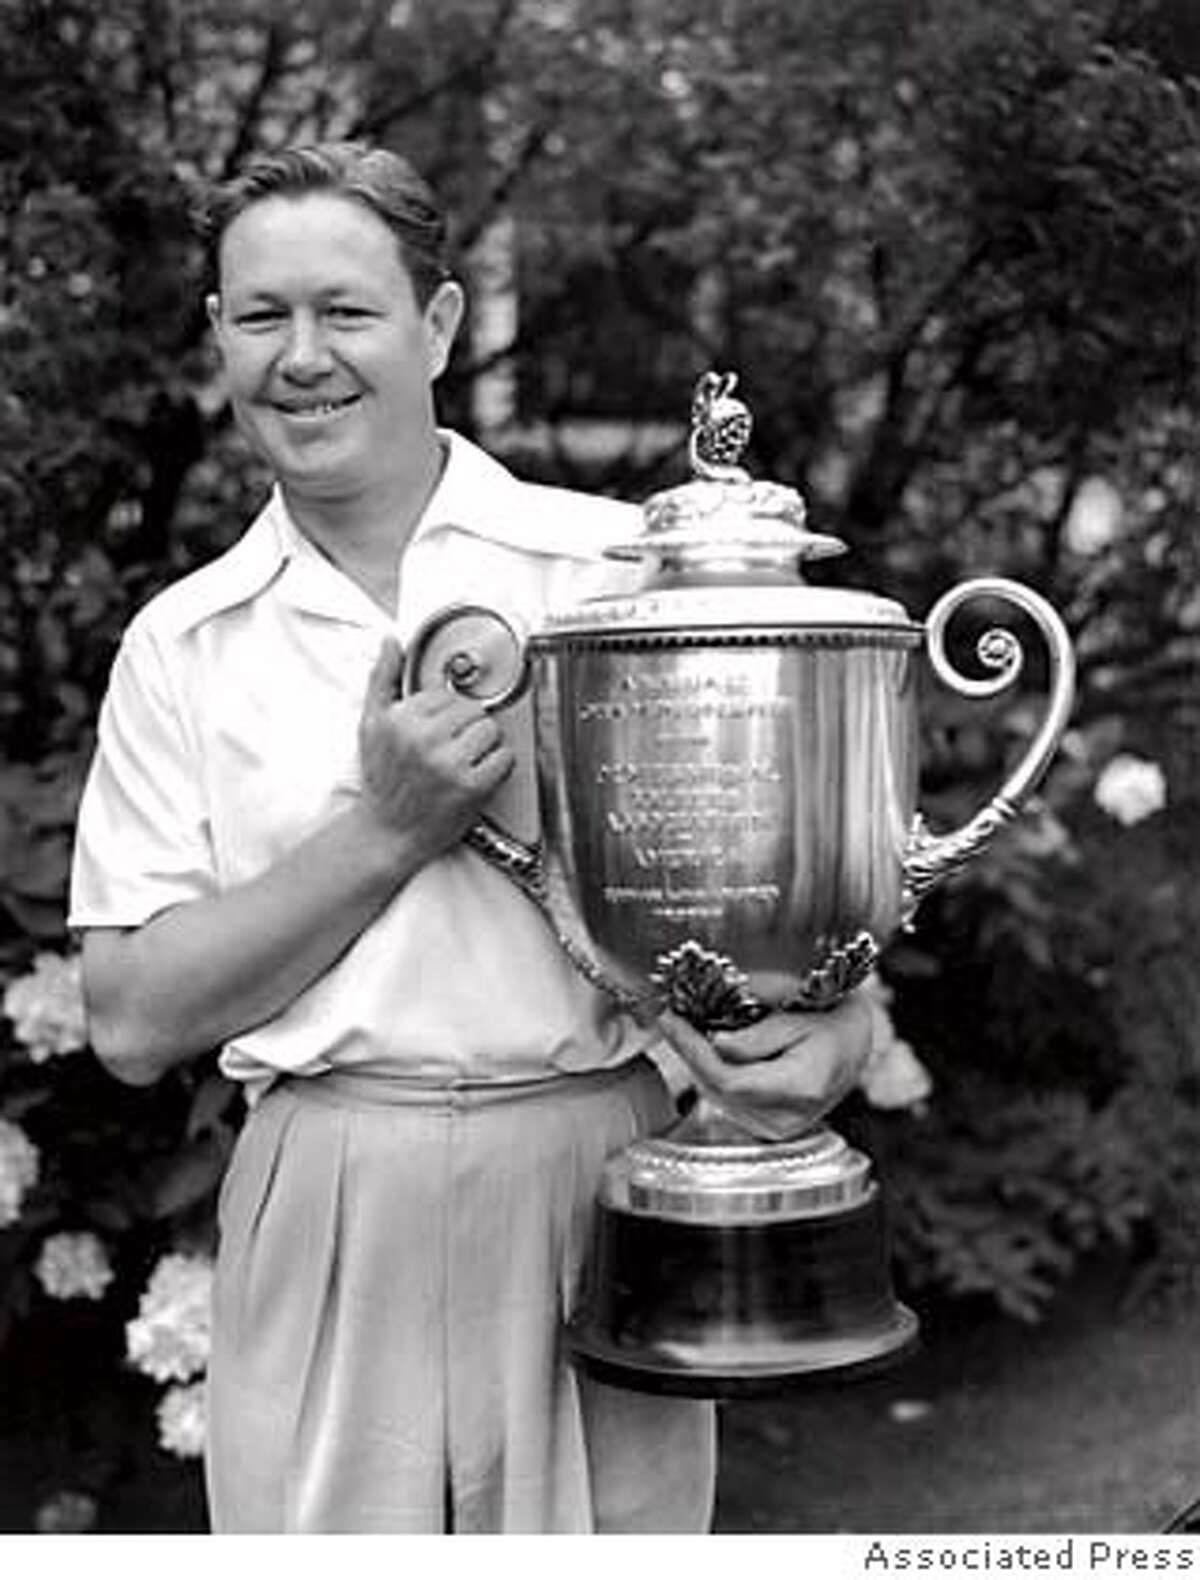 BYRON NELSON 19122006 / Golf loses a legend and a gentleman